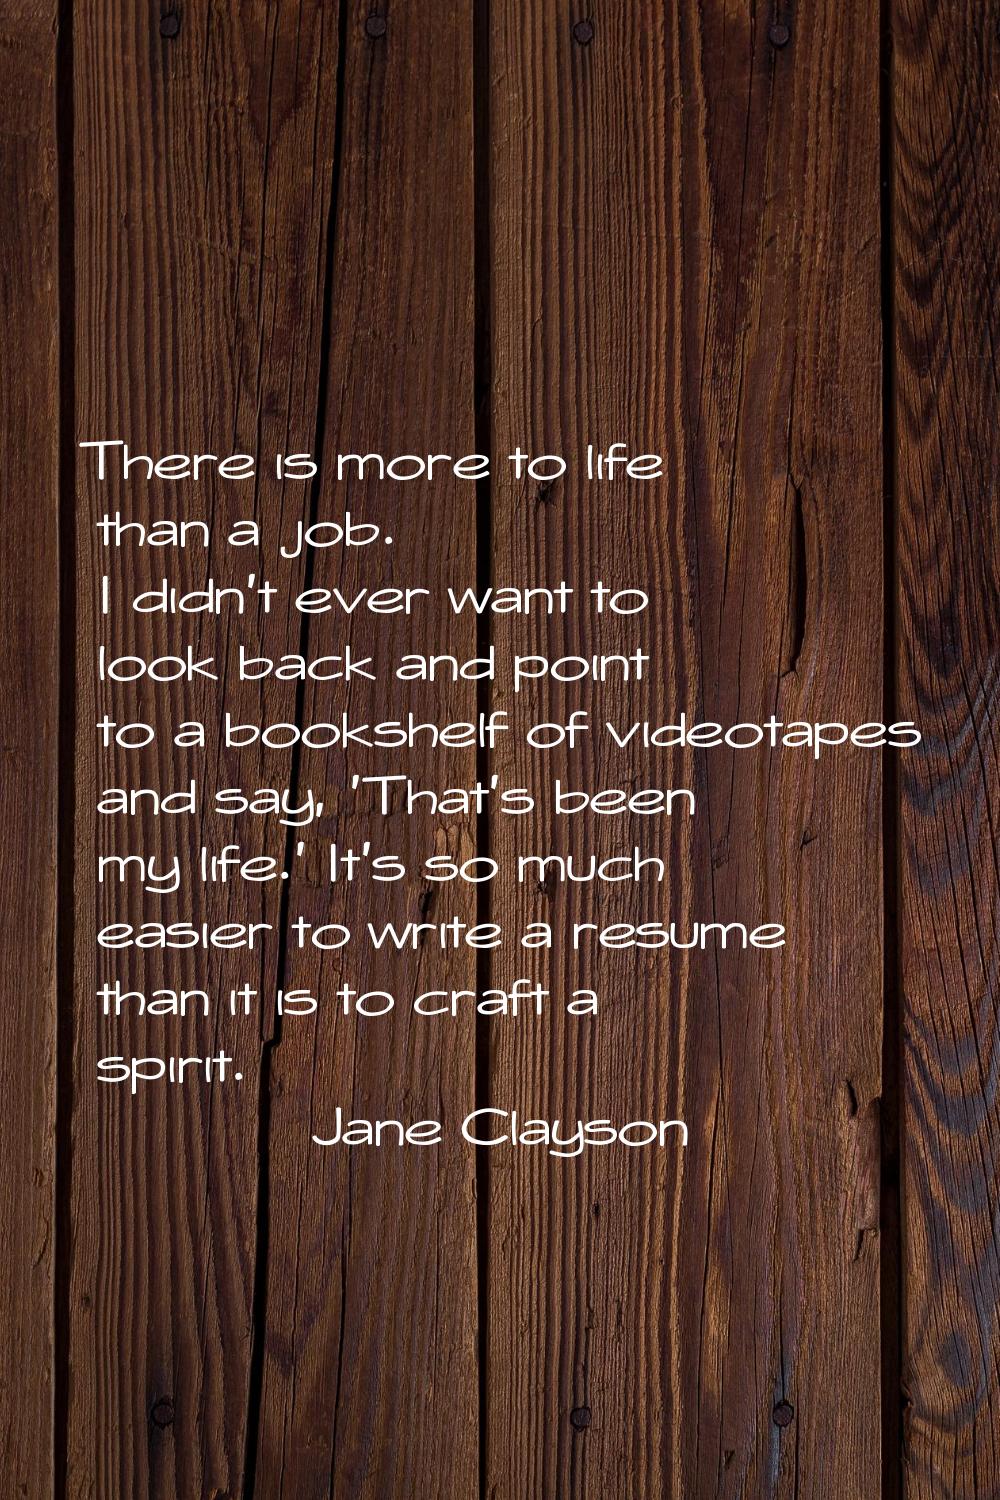 There is more to life than a job. I didn't ever want to look back and point to a bookshelf of video